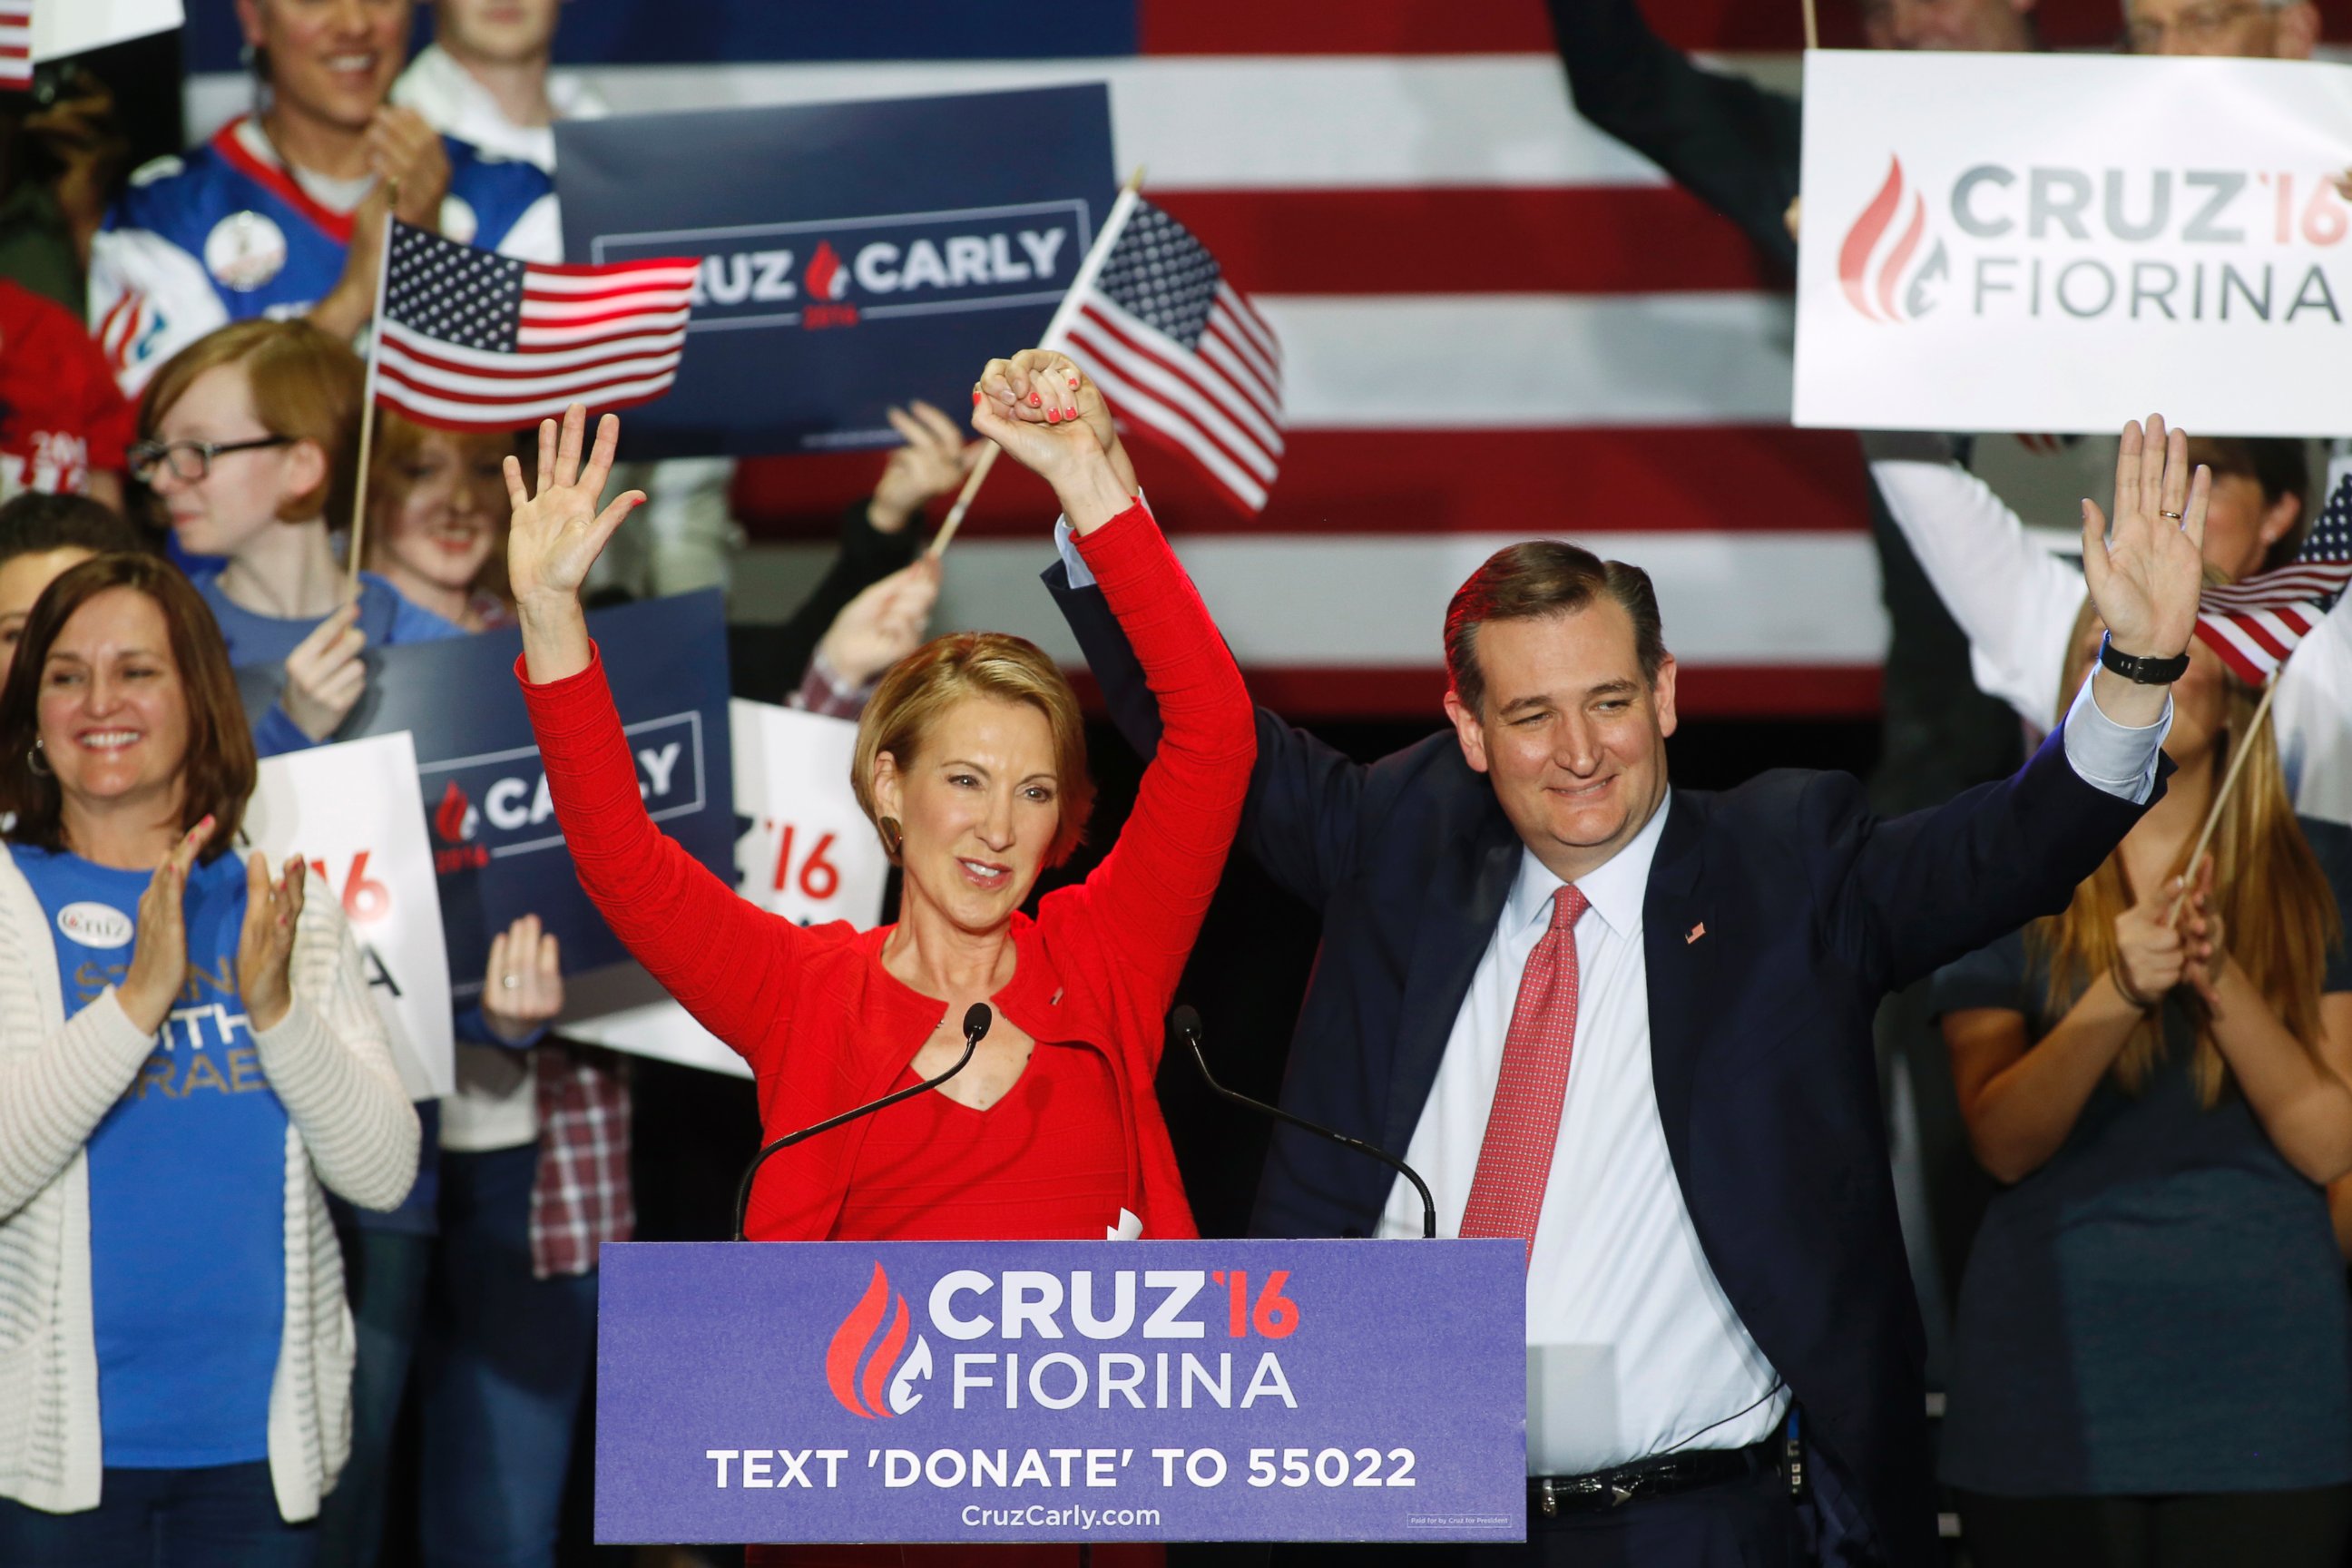 PHOTO: Republican presidential candidate Ted Cruz stands with Carly Fiorina after he announced Fiorina as his running mate at a campaign rally in Indianapolis, April 27, 2016.  